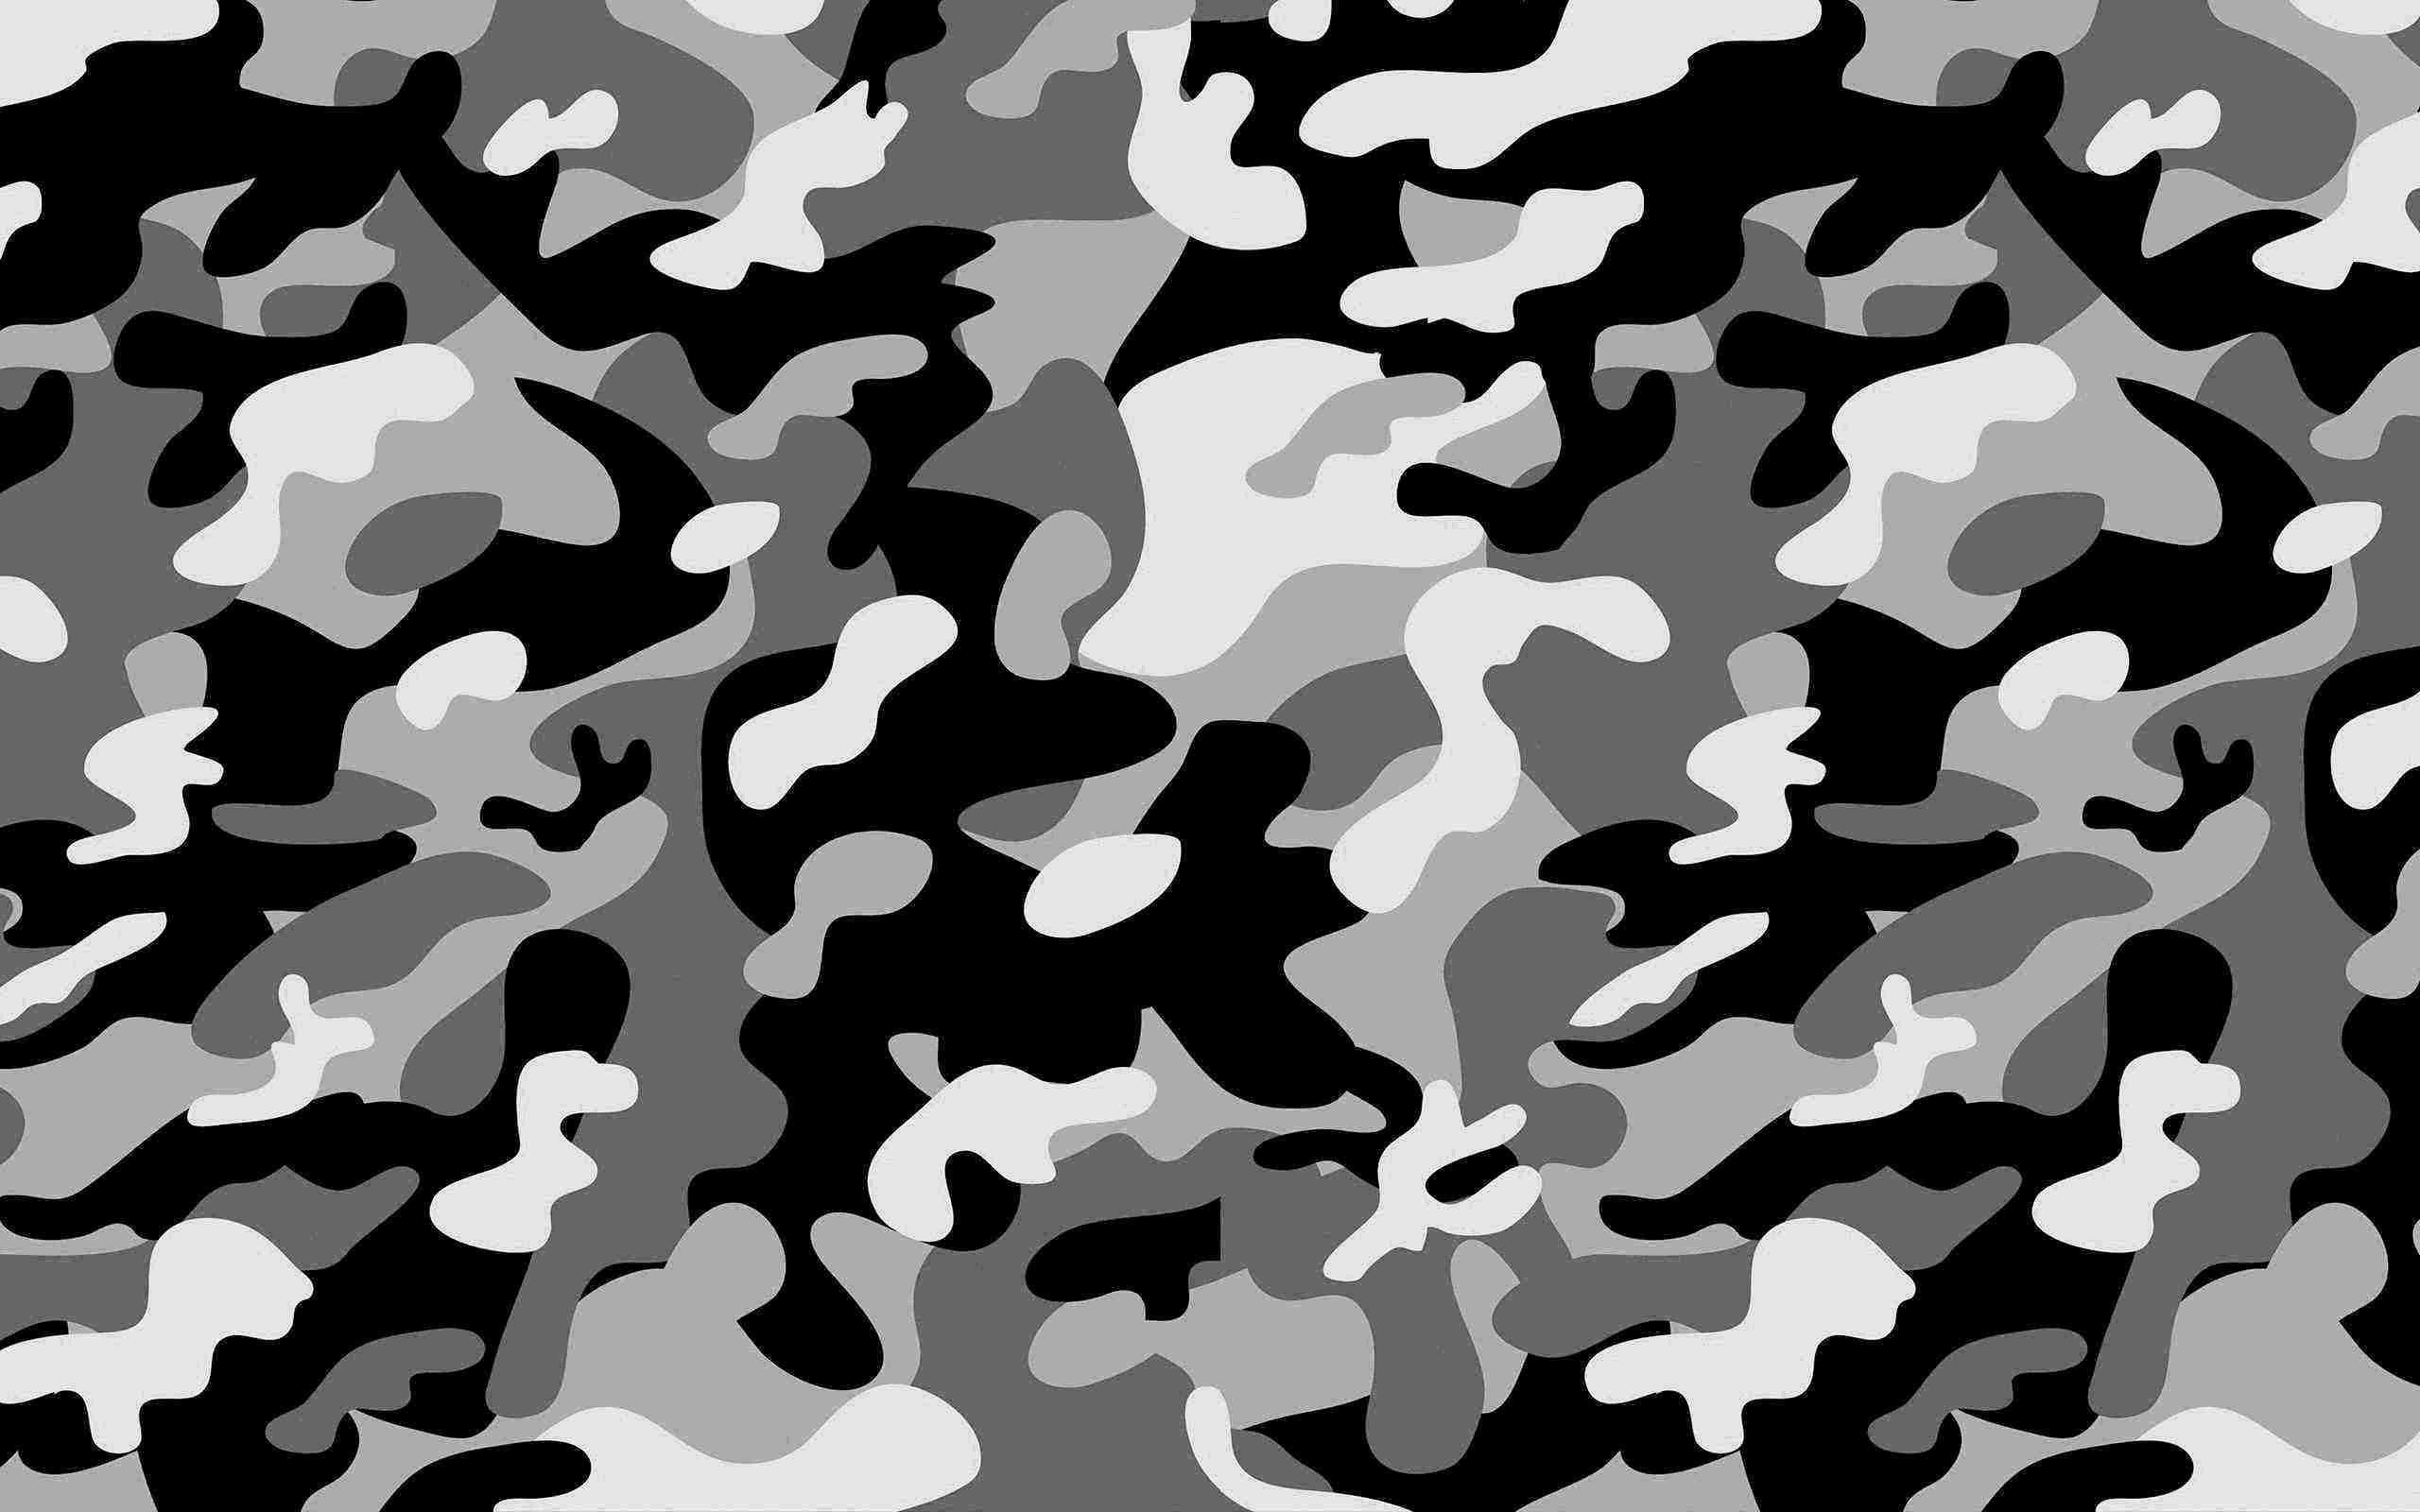 military camouflage, dark backgrounds, camouflage pattern, camouflage textu...